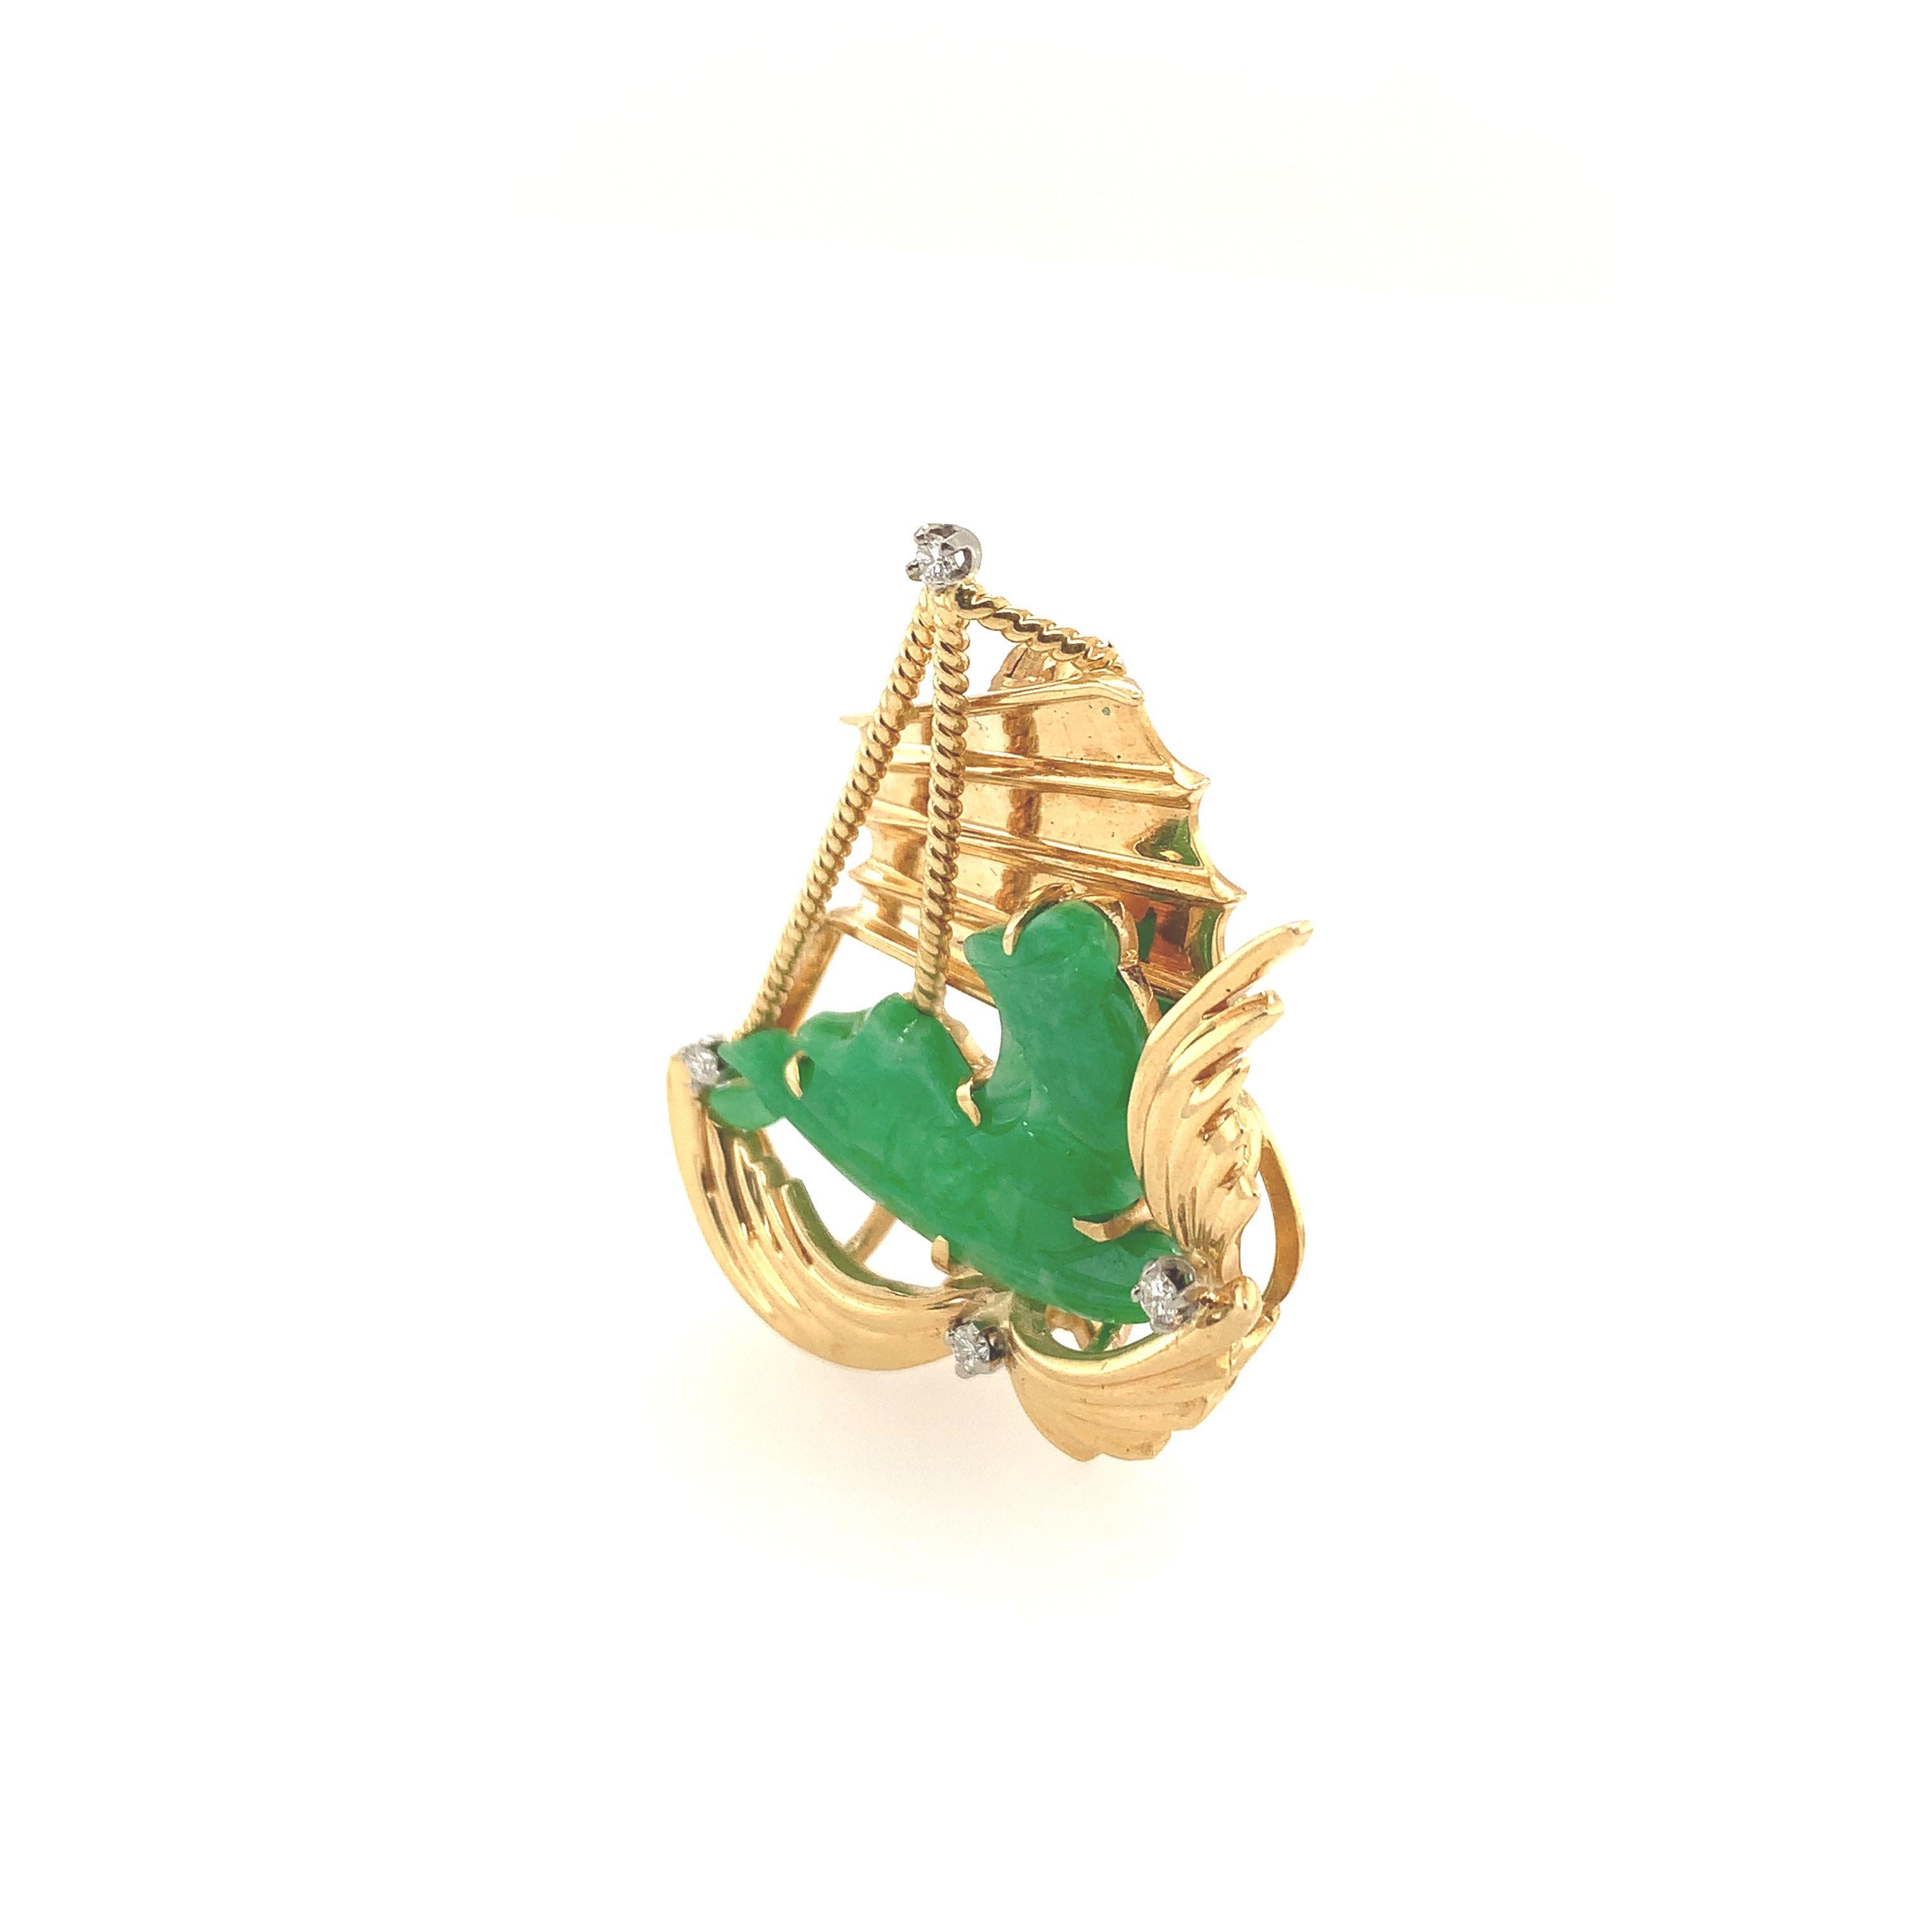 A vintage natural carved jade and 14K yellow gold sailboat brooch boasting (4) four round brilliant cut diamonds weighing approximately .08ct tw. Fitted with pin and safety catch - ready to sail away... 
These iconic ships have long been one of the